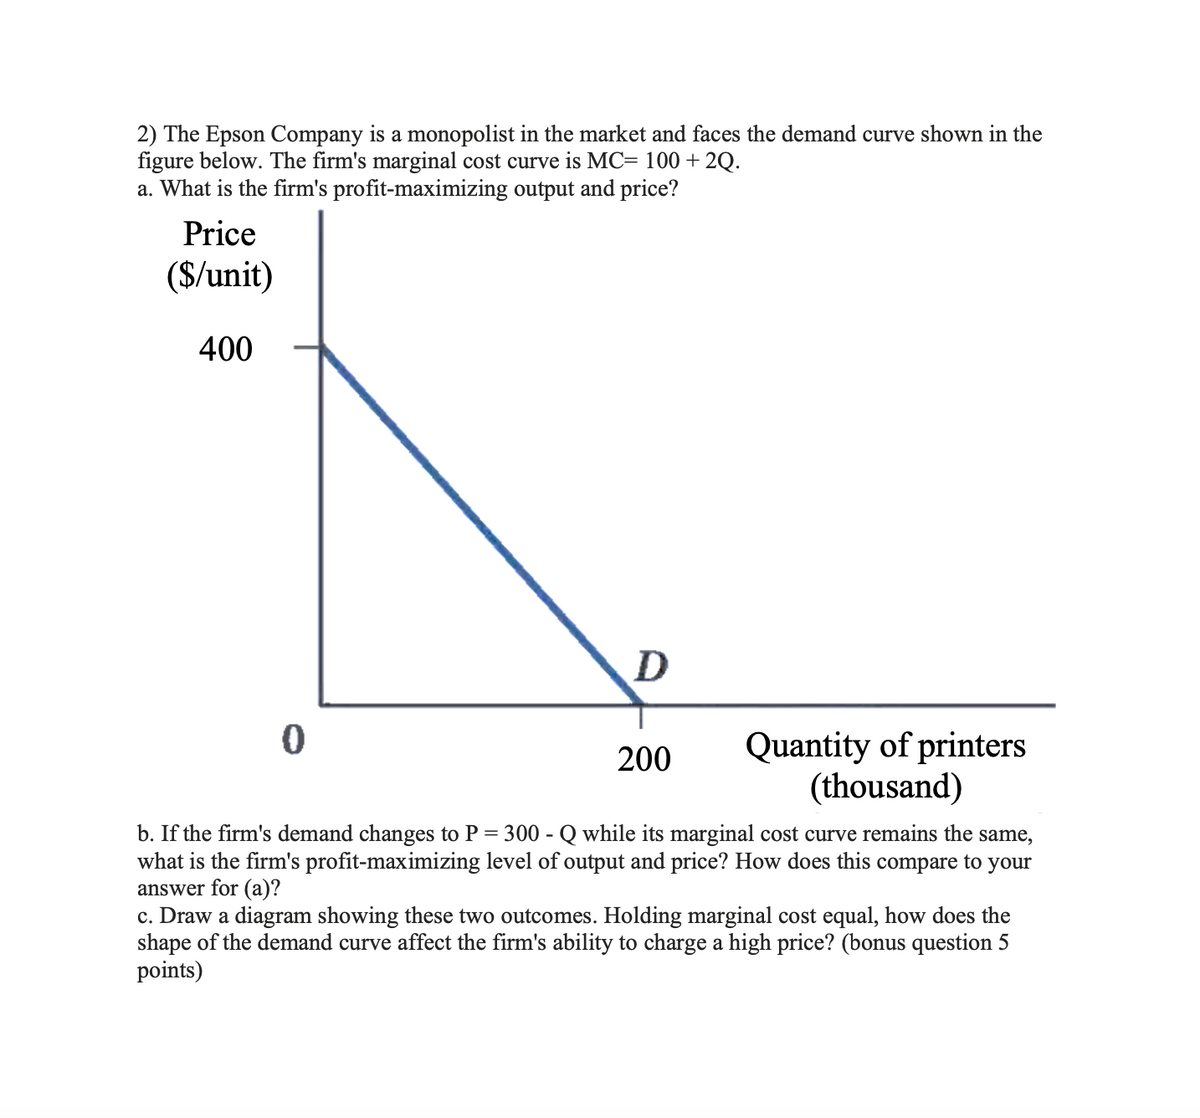 2) The Epson Company is a monopolist in the market and faces the demand curve shown in the
figure below. The firm's marginal cost curve is MC= 100 +2Q.
a. What is the firm's profit-maximizing output and price?
Price
($/unit)
400
0
D
200
Quantity of printers
(thousand)
b. If the firm's demand changes to P = 300 - Q while its marginal cost curve remains the same,
what is the firm's profit-maximizing level of output and price? How does this compare to your
answer for (a)?
c. Draw a diagram showing these two outcomes. Holding marginal cost equal, how does the
shape of the demand curve affect the firm's ability to charge a high price? (bonus question 5
points)